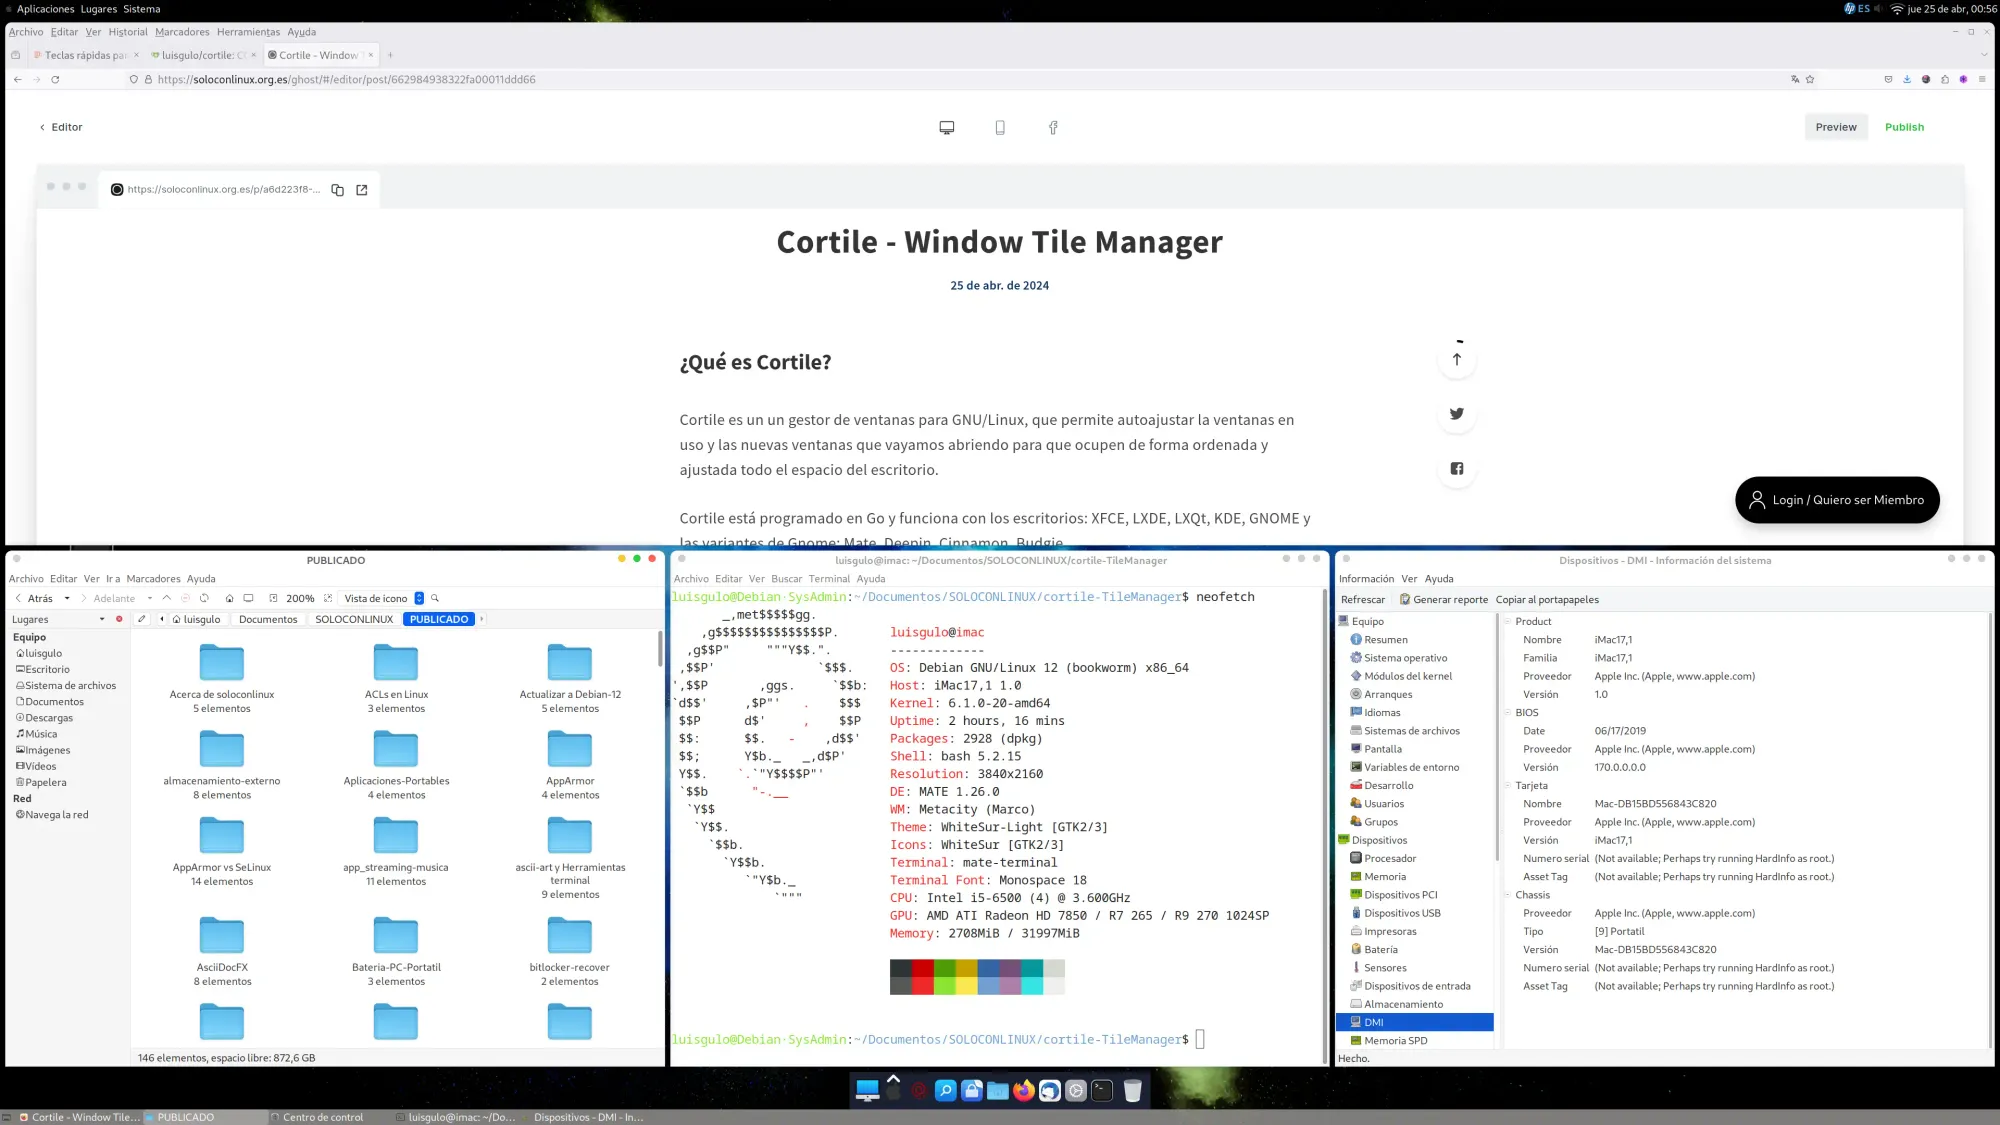 Cortile - Window Tile Manager